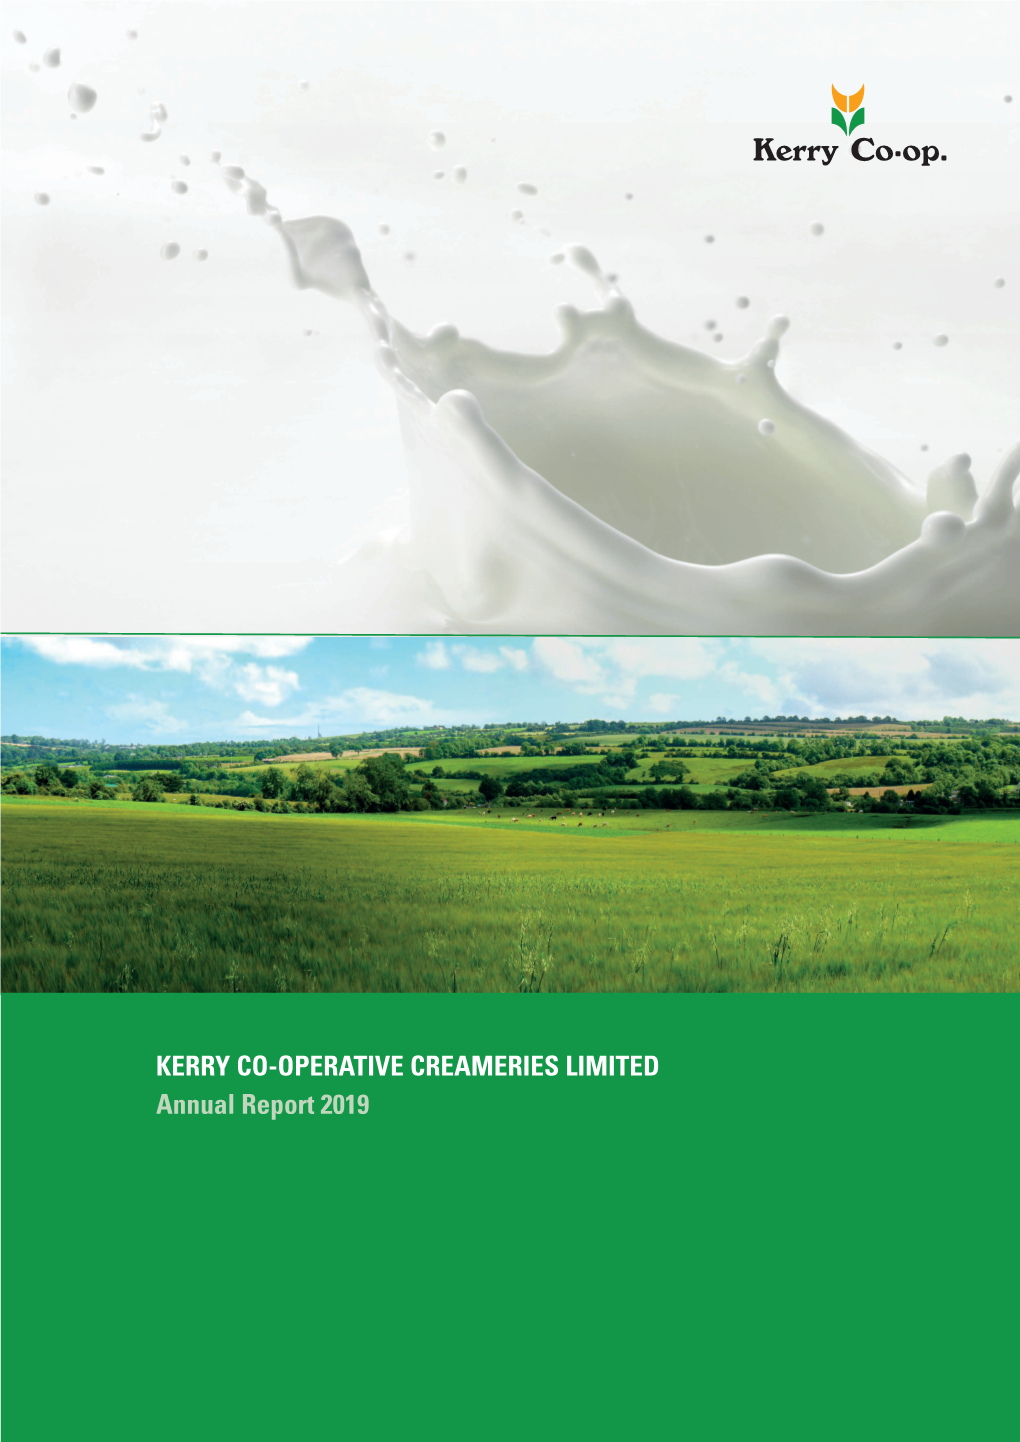 KERRY CO-OPERATIVE CREAMERIES LIMITED Annual Report 2019